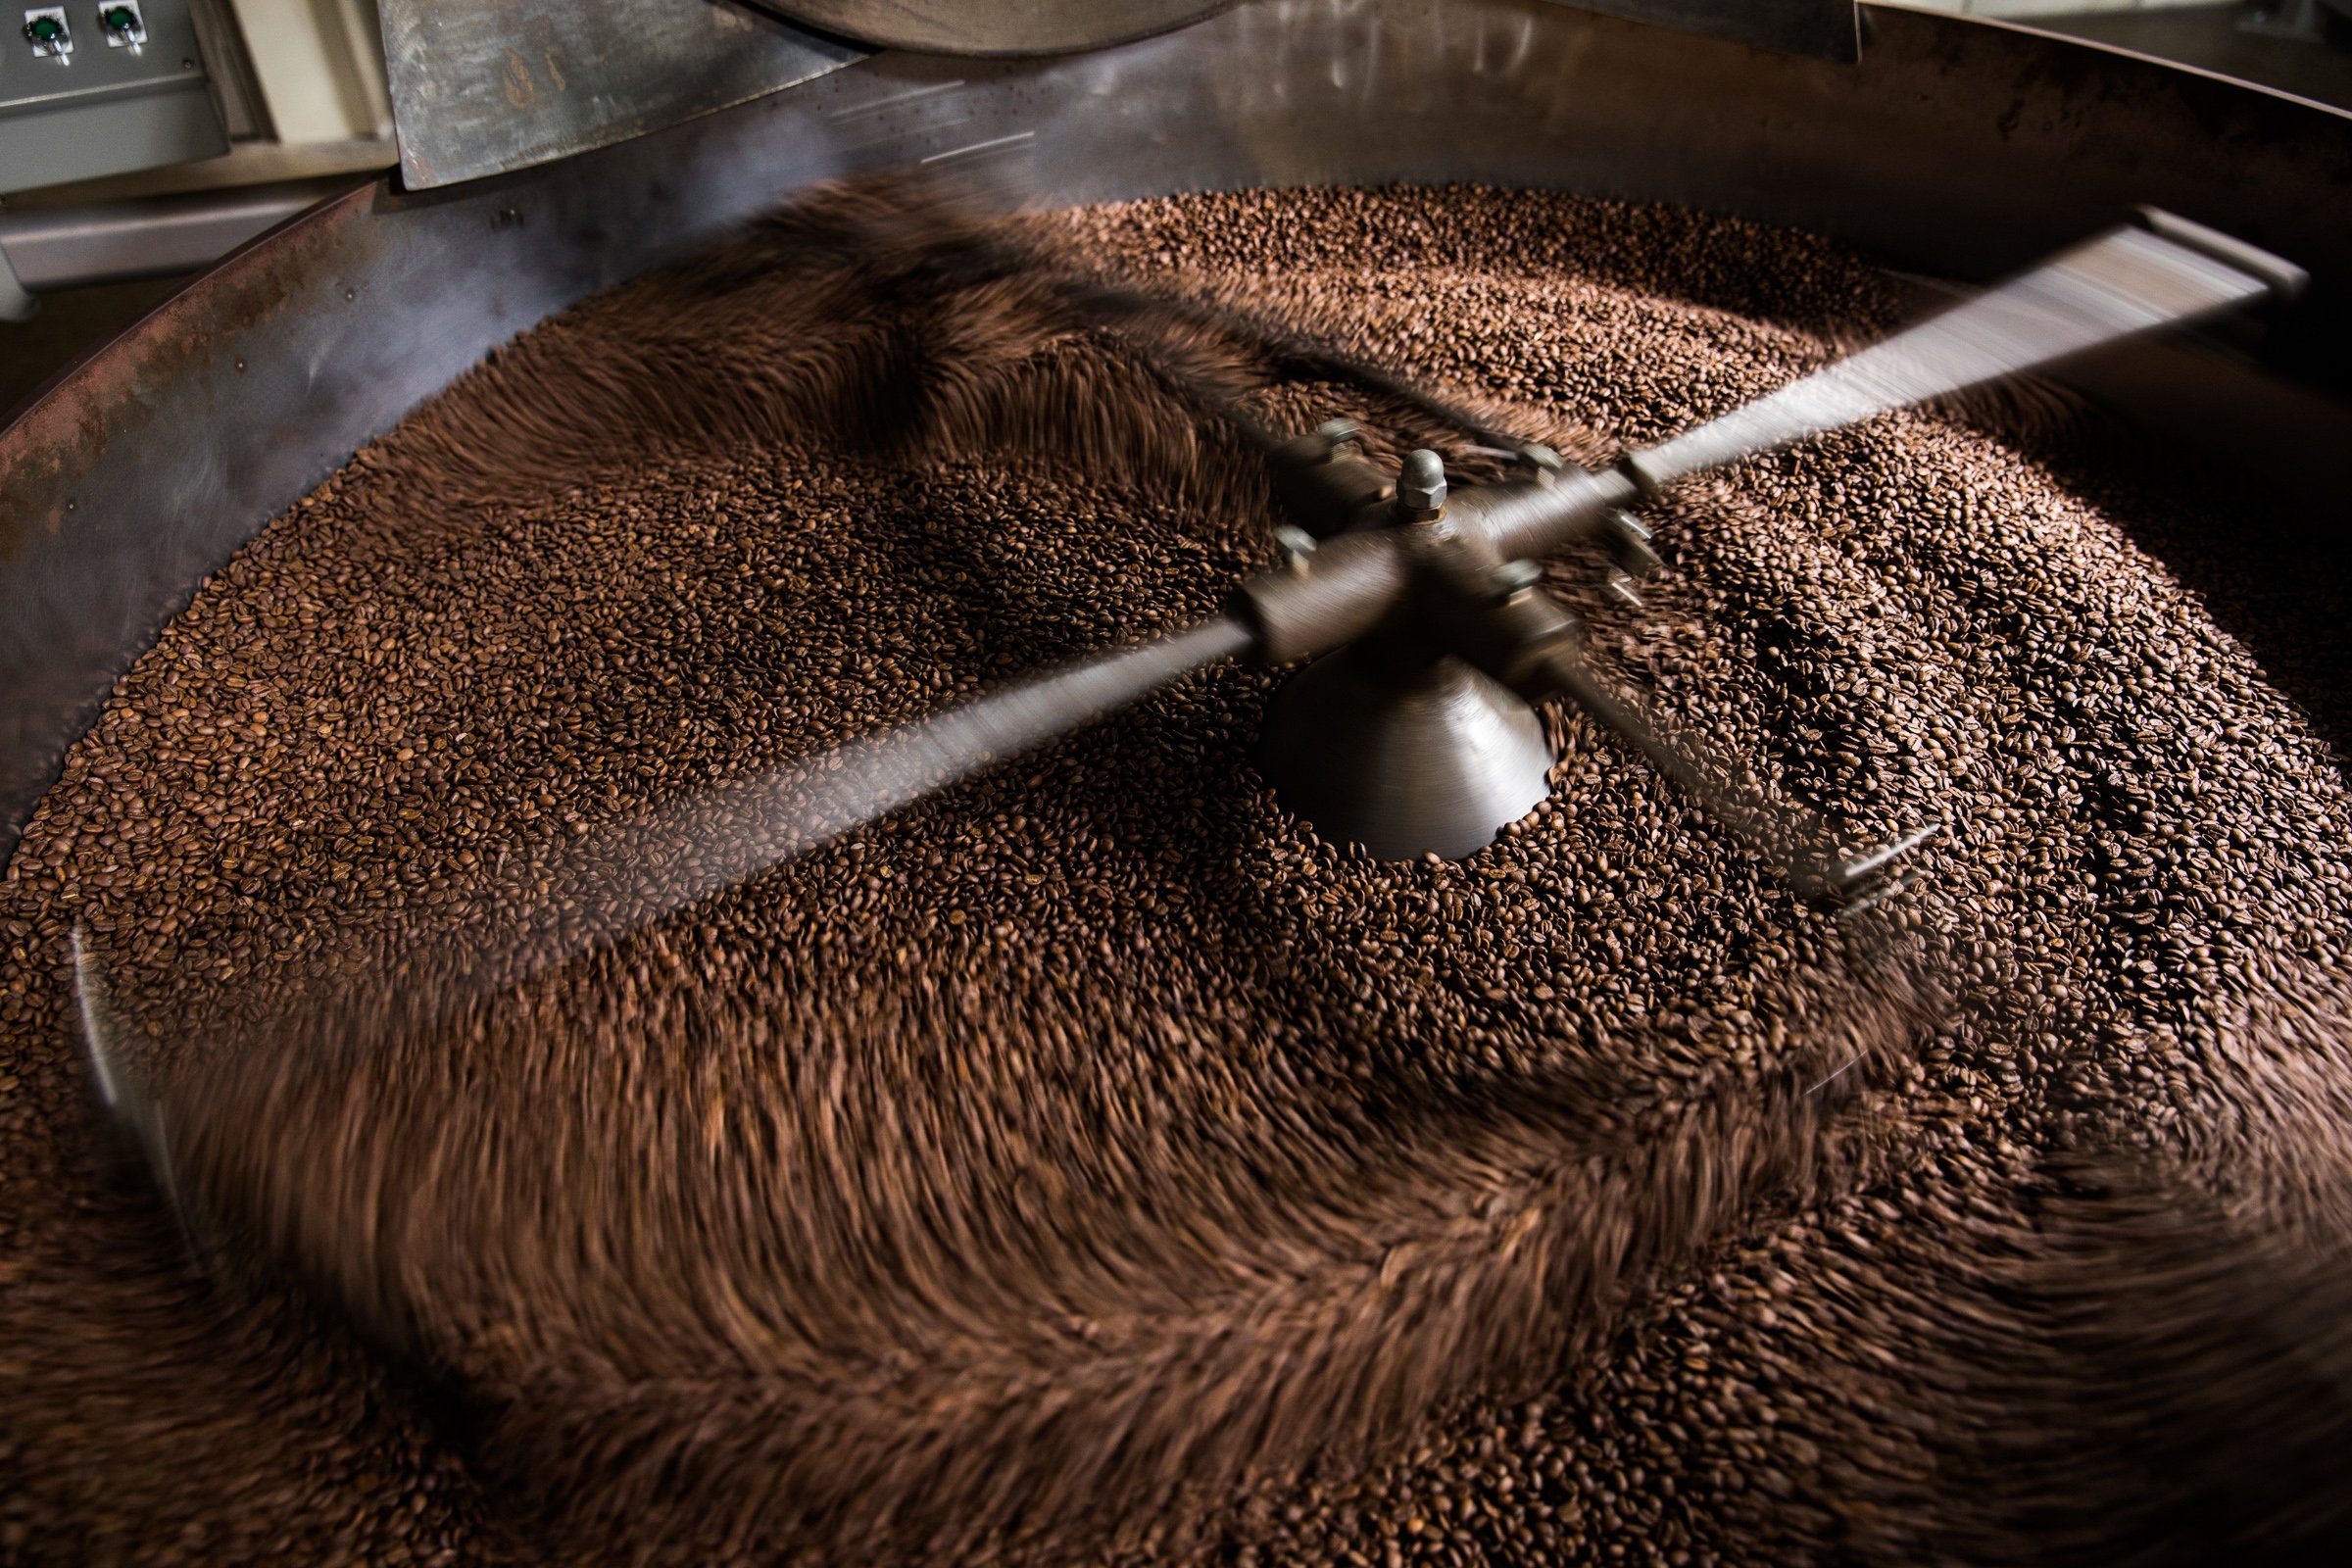  There’s nothing like good roast. Have your pick of local beans to take home or enjoy a cup at a local coffee shop.   Photo courtesy Kona Coffee Purveyors  